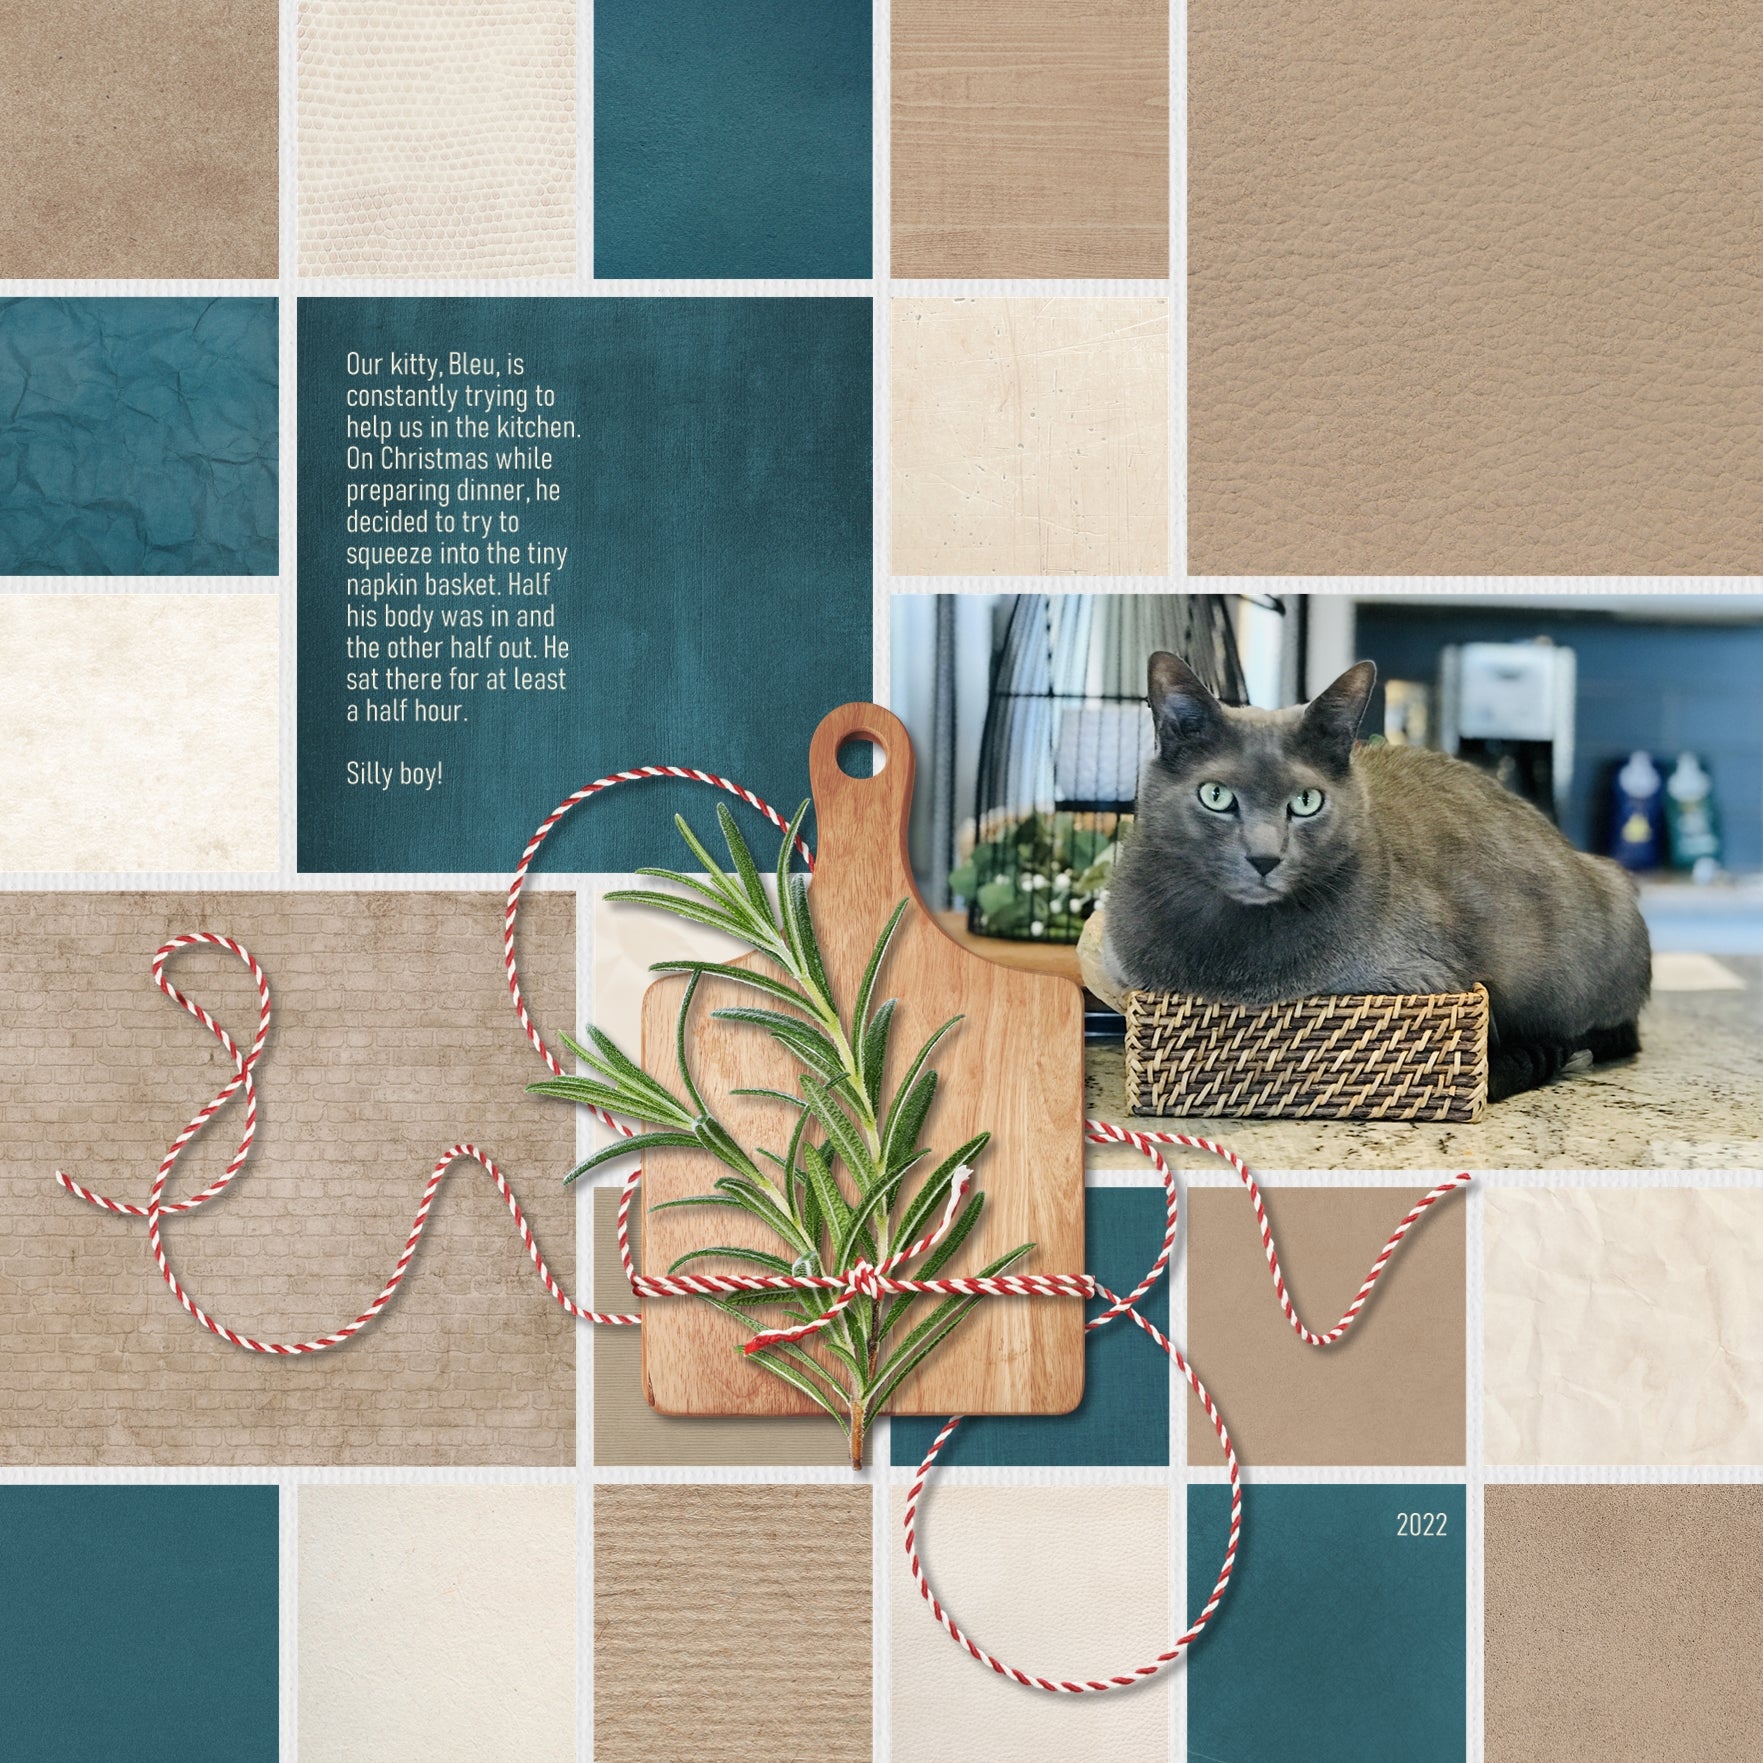 Purely Papers Digital Scrapbook Bundle 1 offers 180 unique digital designer papers in a neutral palette with subtle textures. The 9 kits (20 papers each) included in the bundle are Blissfully Brown, Boldly Black, Cuddly Cream, Gentlemanly Gray, Greatly Gold, Largely Light Gray, Sparkly Silver, Thoughtfully Tan, and Weekly White.